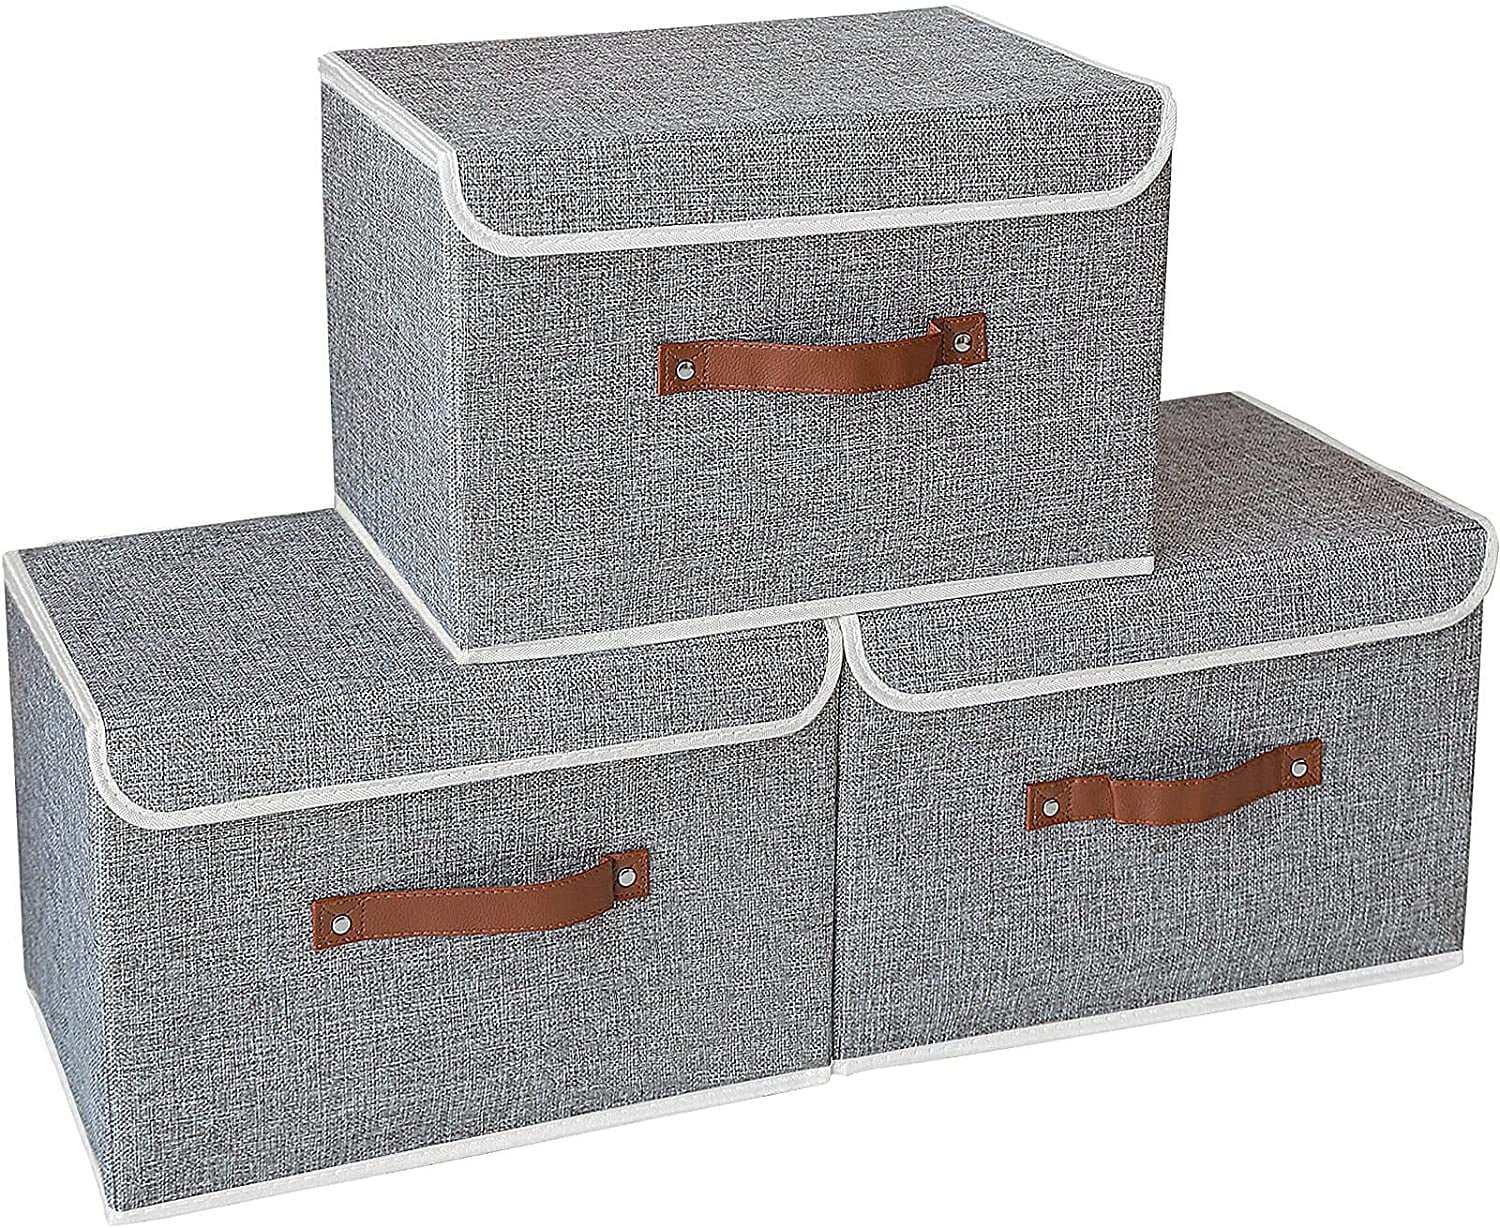 Foldable Storage Boxes With Lid Collapsible Home Clothes Organizer Fabric Cube H 